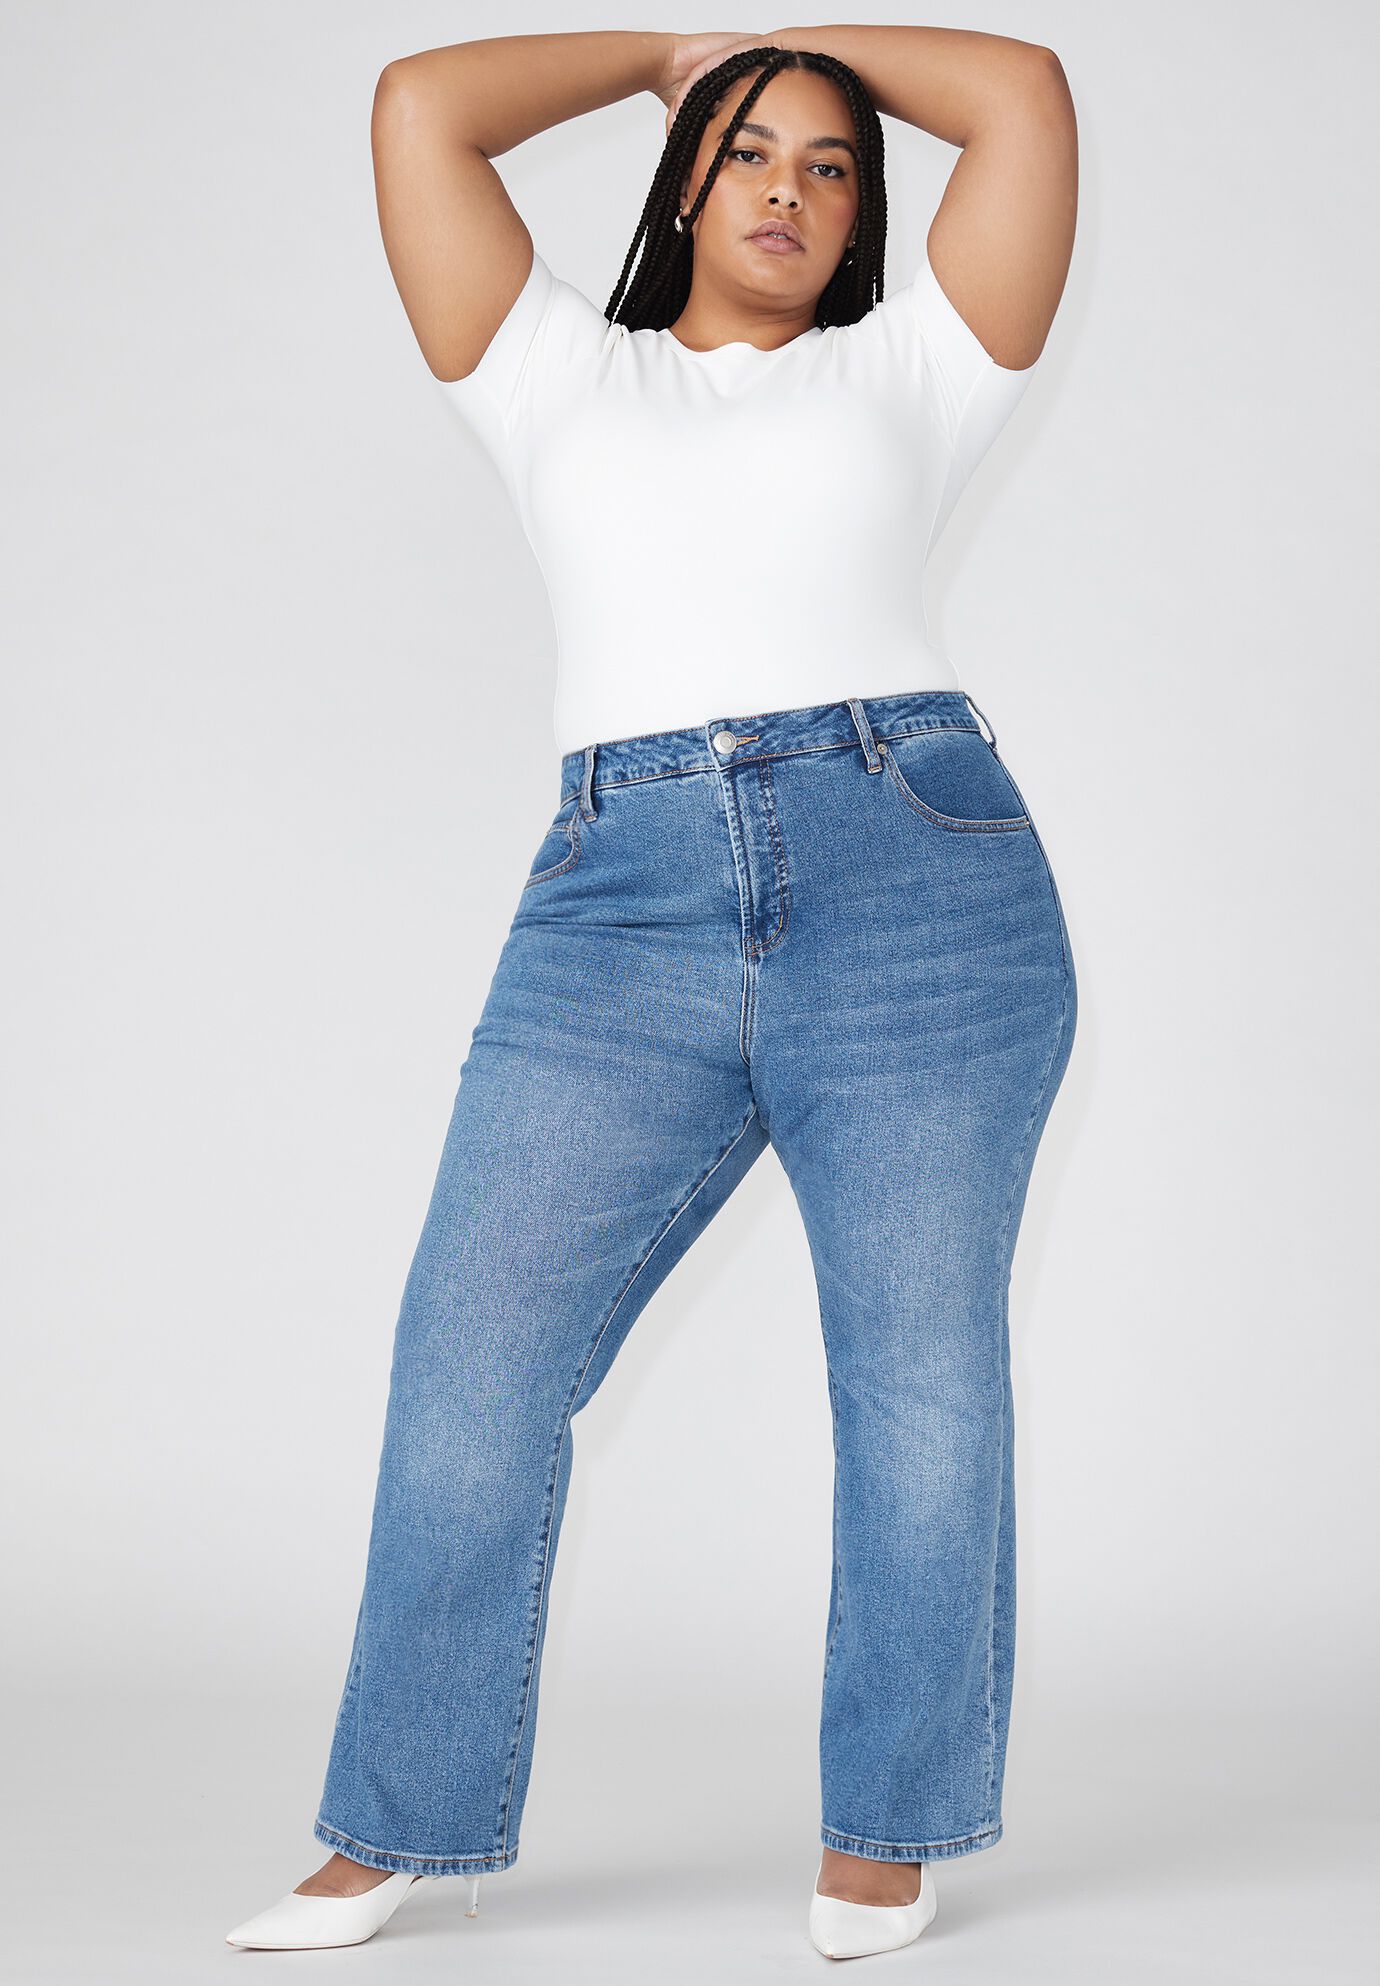 Plus Size Women The Flare Jean By ( Size 26 )